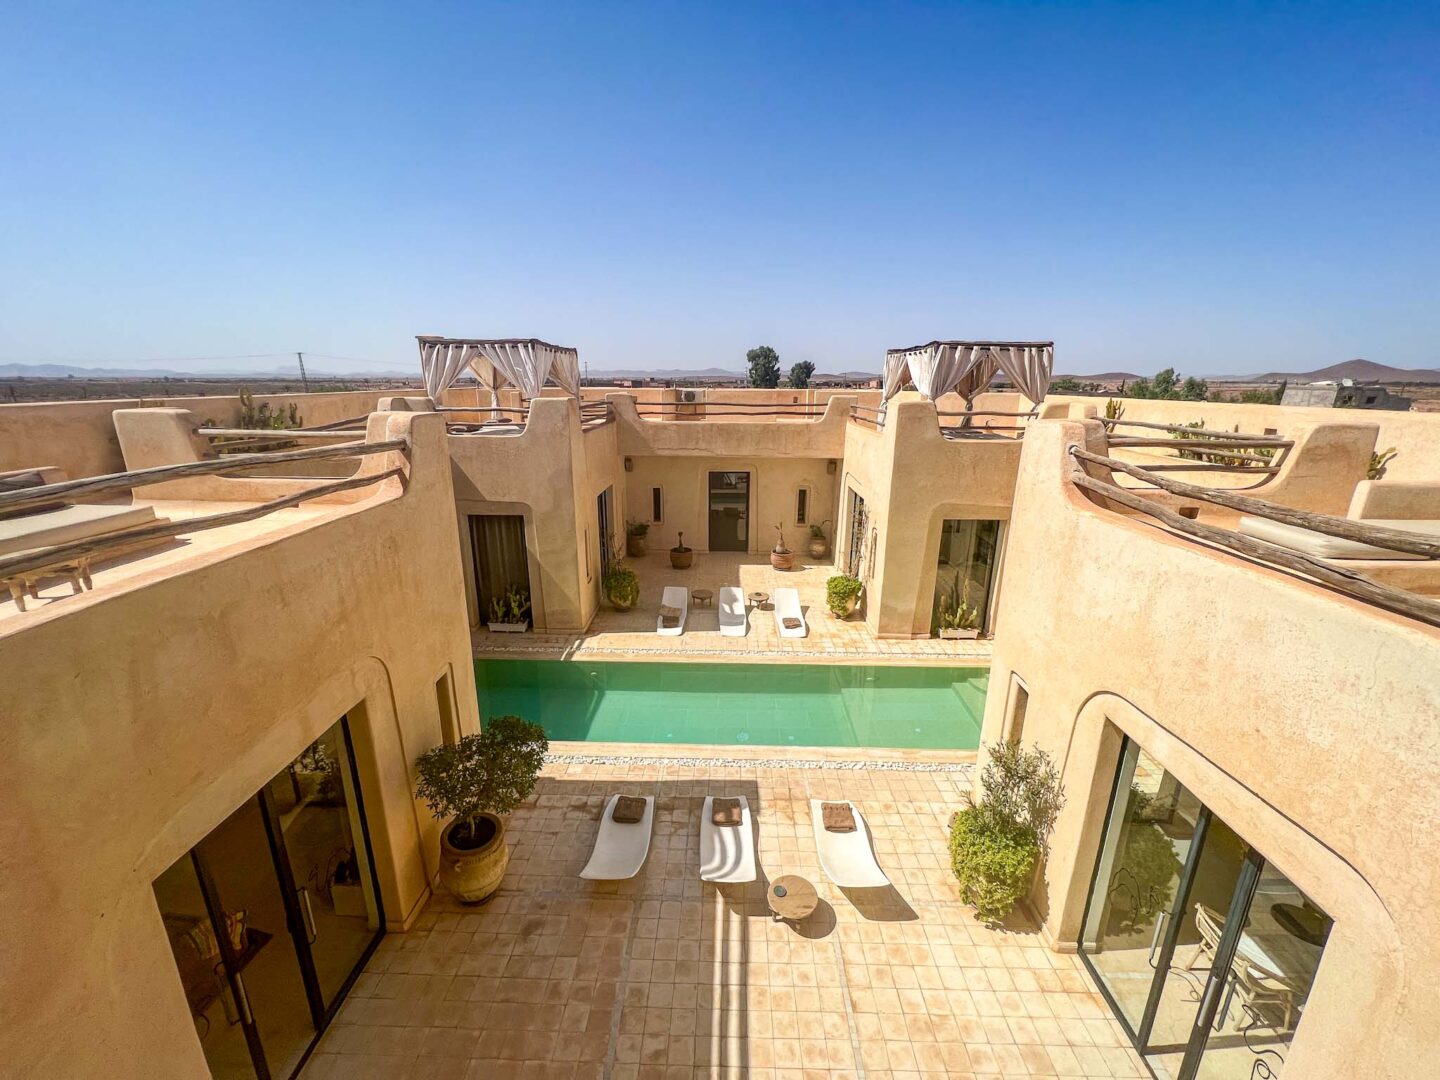 family villa Marrakech with pool from above